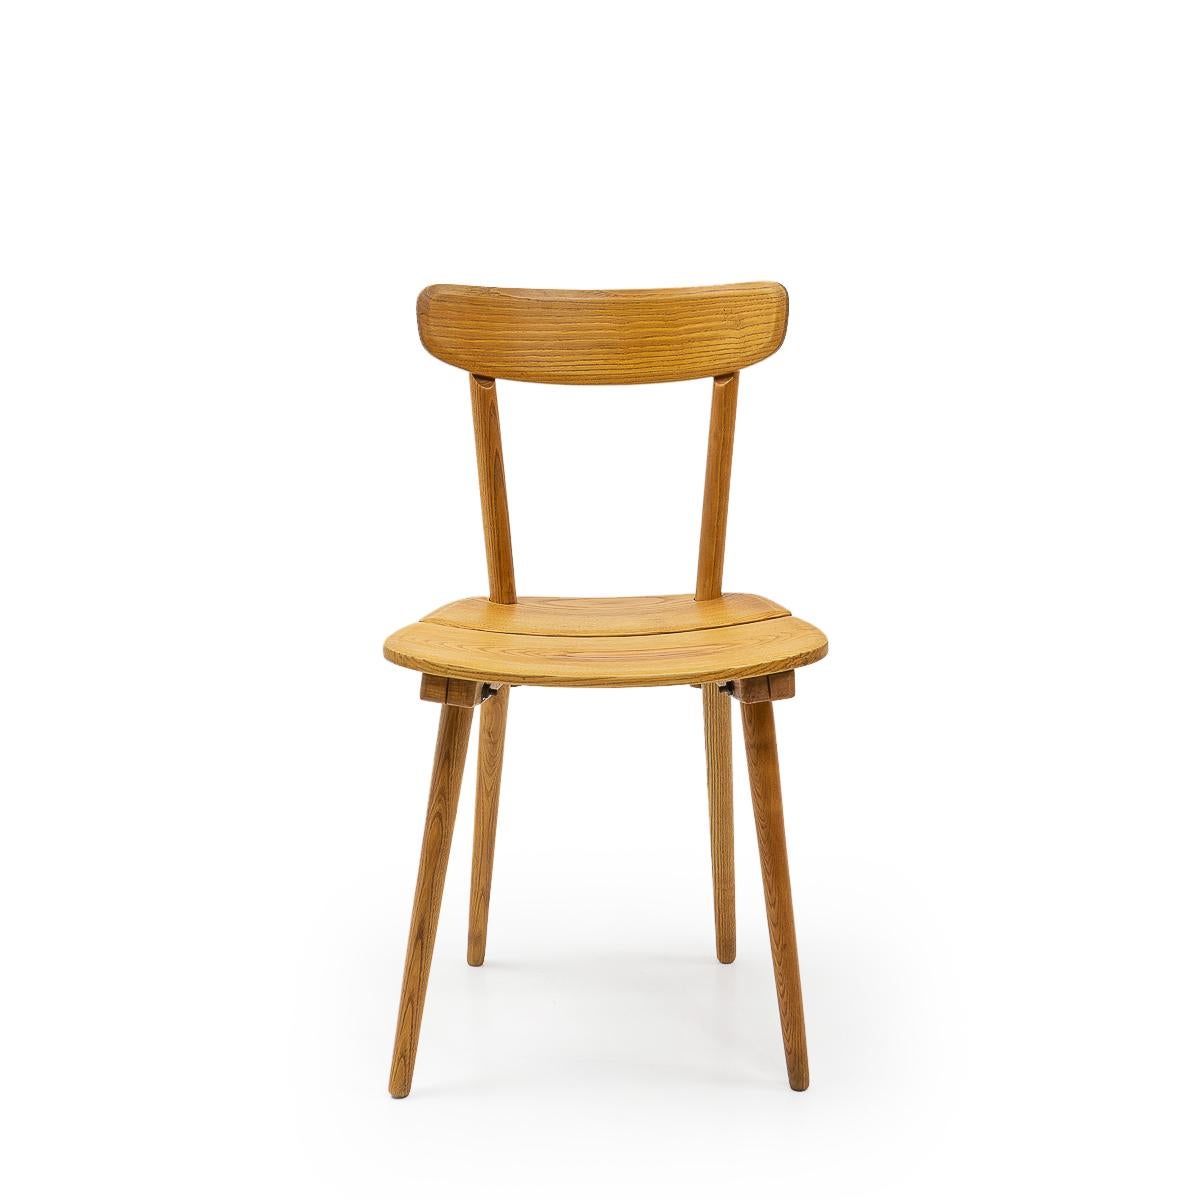 A Swiss design classic by Jakob Müller for Wohnhilfe Switzerland originally designed in the 1940s.




 
Condition: Good, signs of age as per images. No repairs, but stains and discolorations of the wood.
Origination: Switzerland, 1950s.